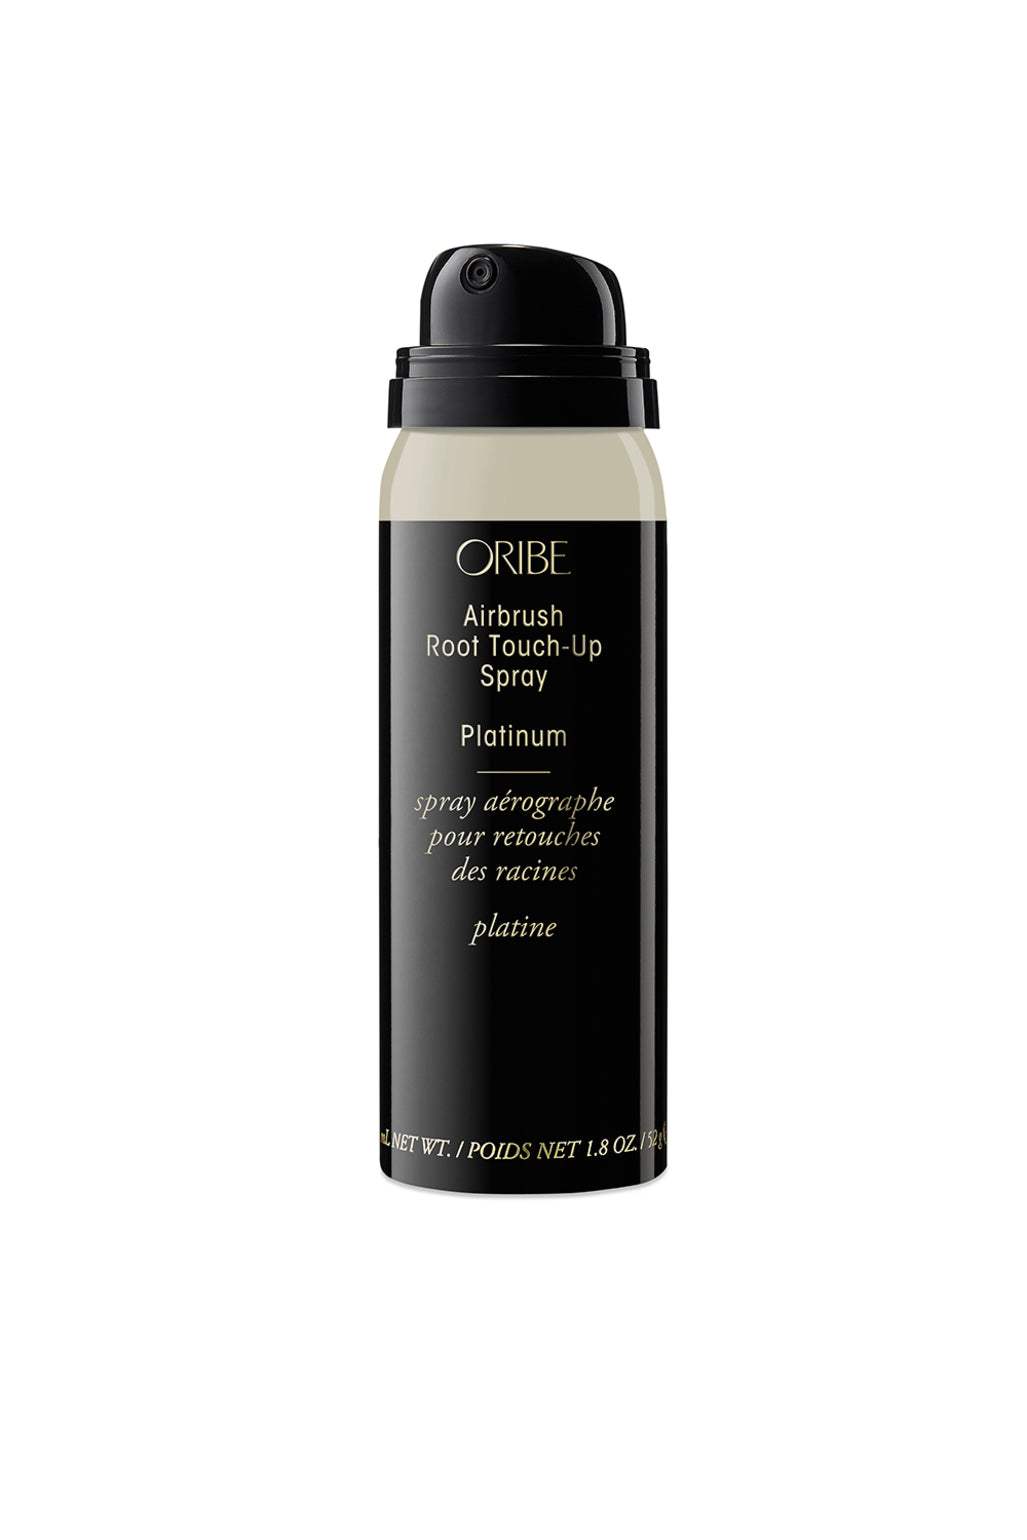 ORIBE AIRBRUSH ROOT TOUCH-UP SPRAY